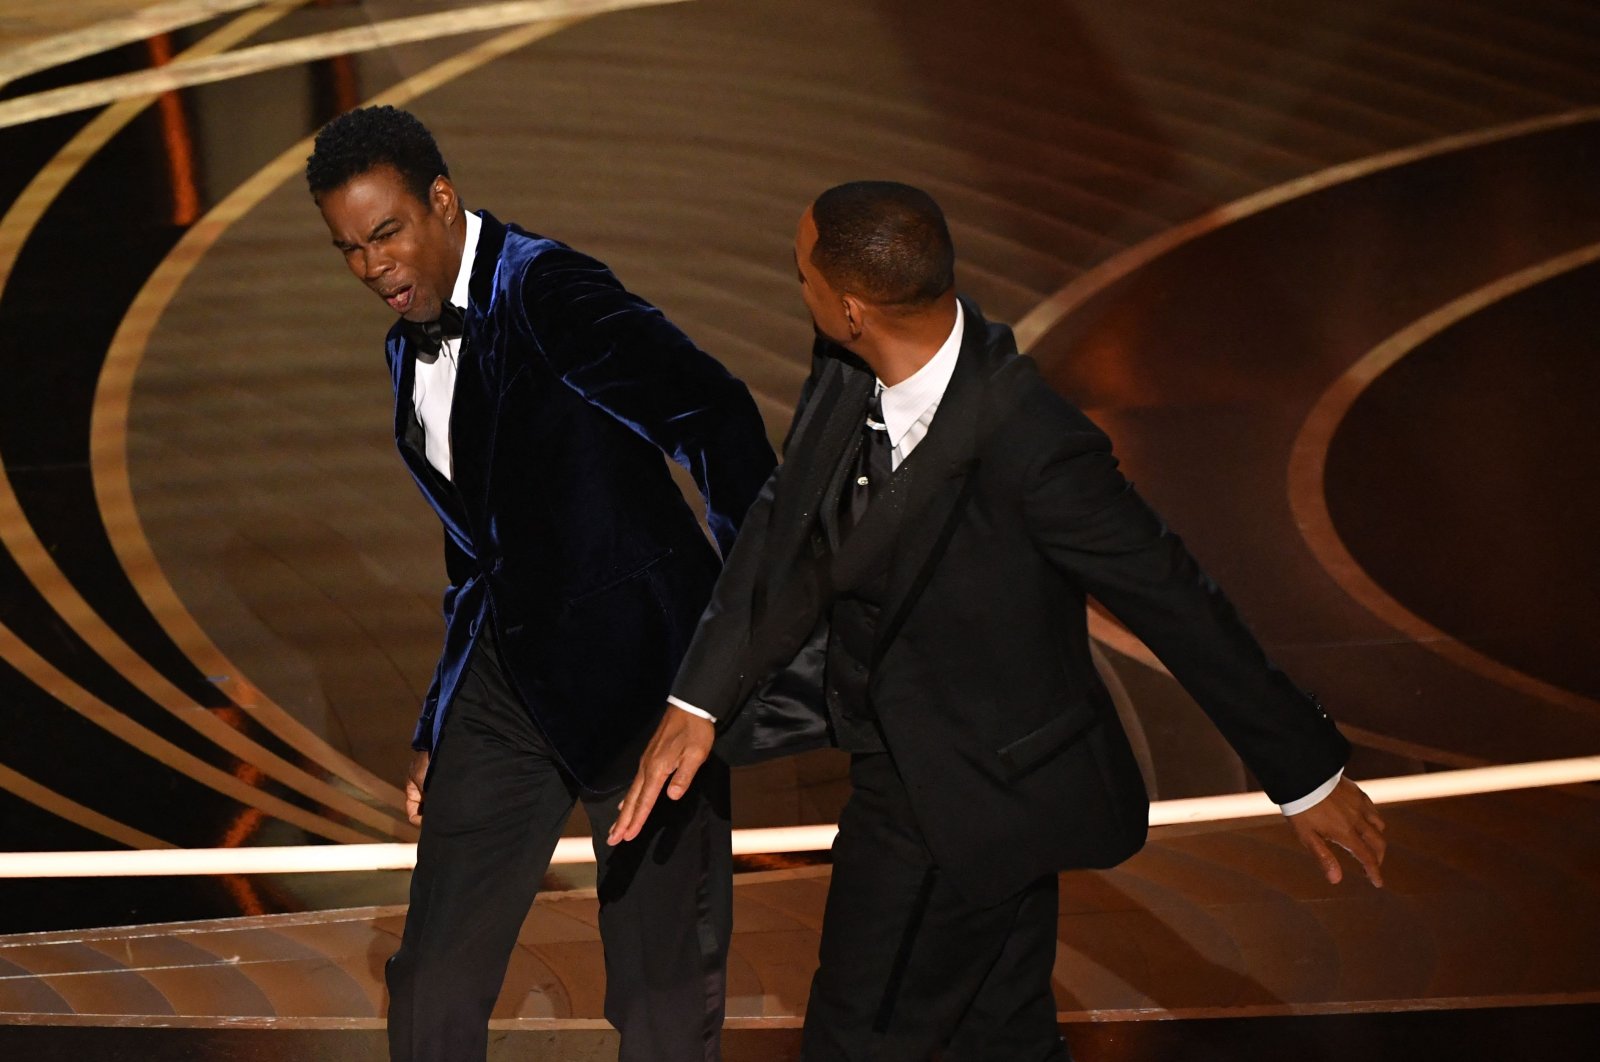 Will Smith (R) slaps Chris Rock onstage during the 94th Oscars at the Dolby Theatre in Hollywood, California, U.S., March 27, 2022. (AFP Photo)